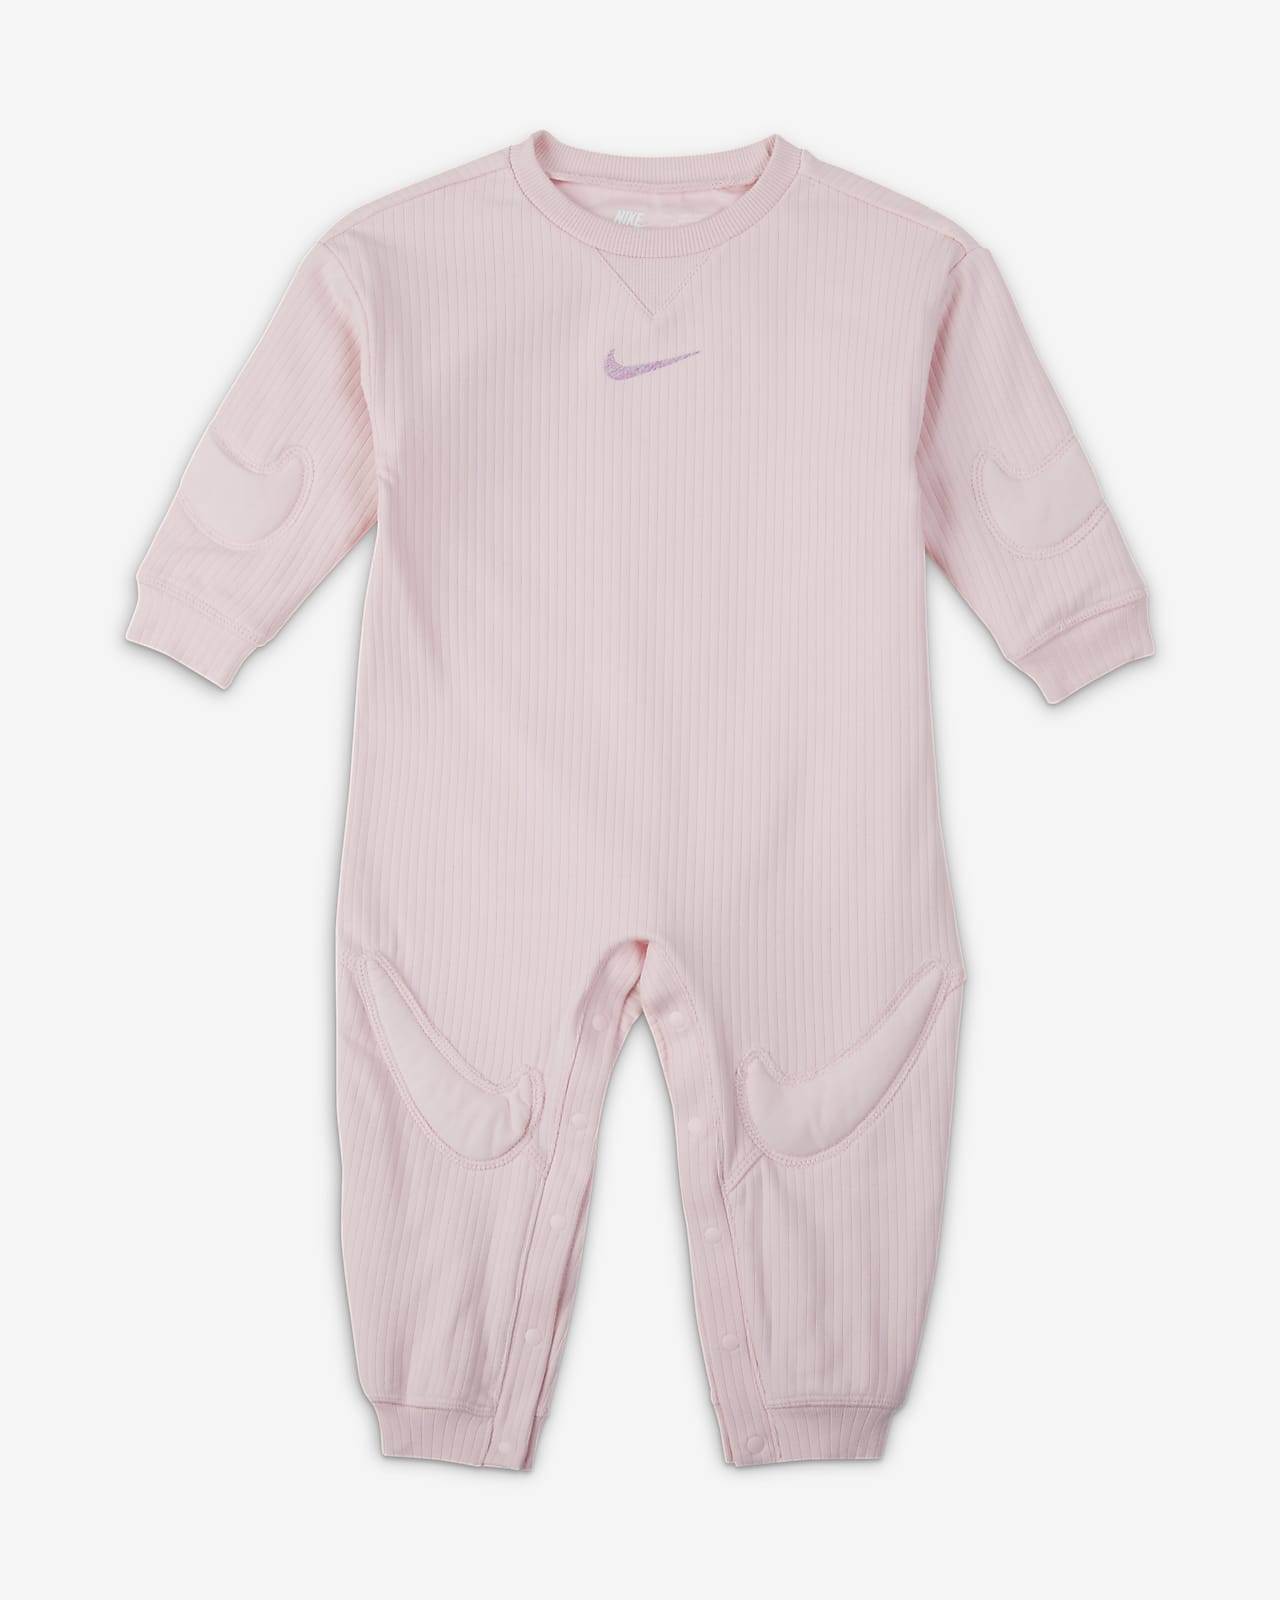 Nike 'Ready, Set' Baby Overalls